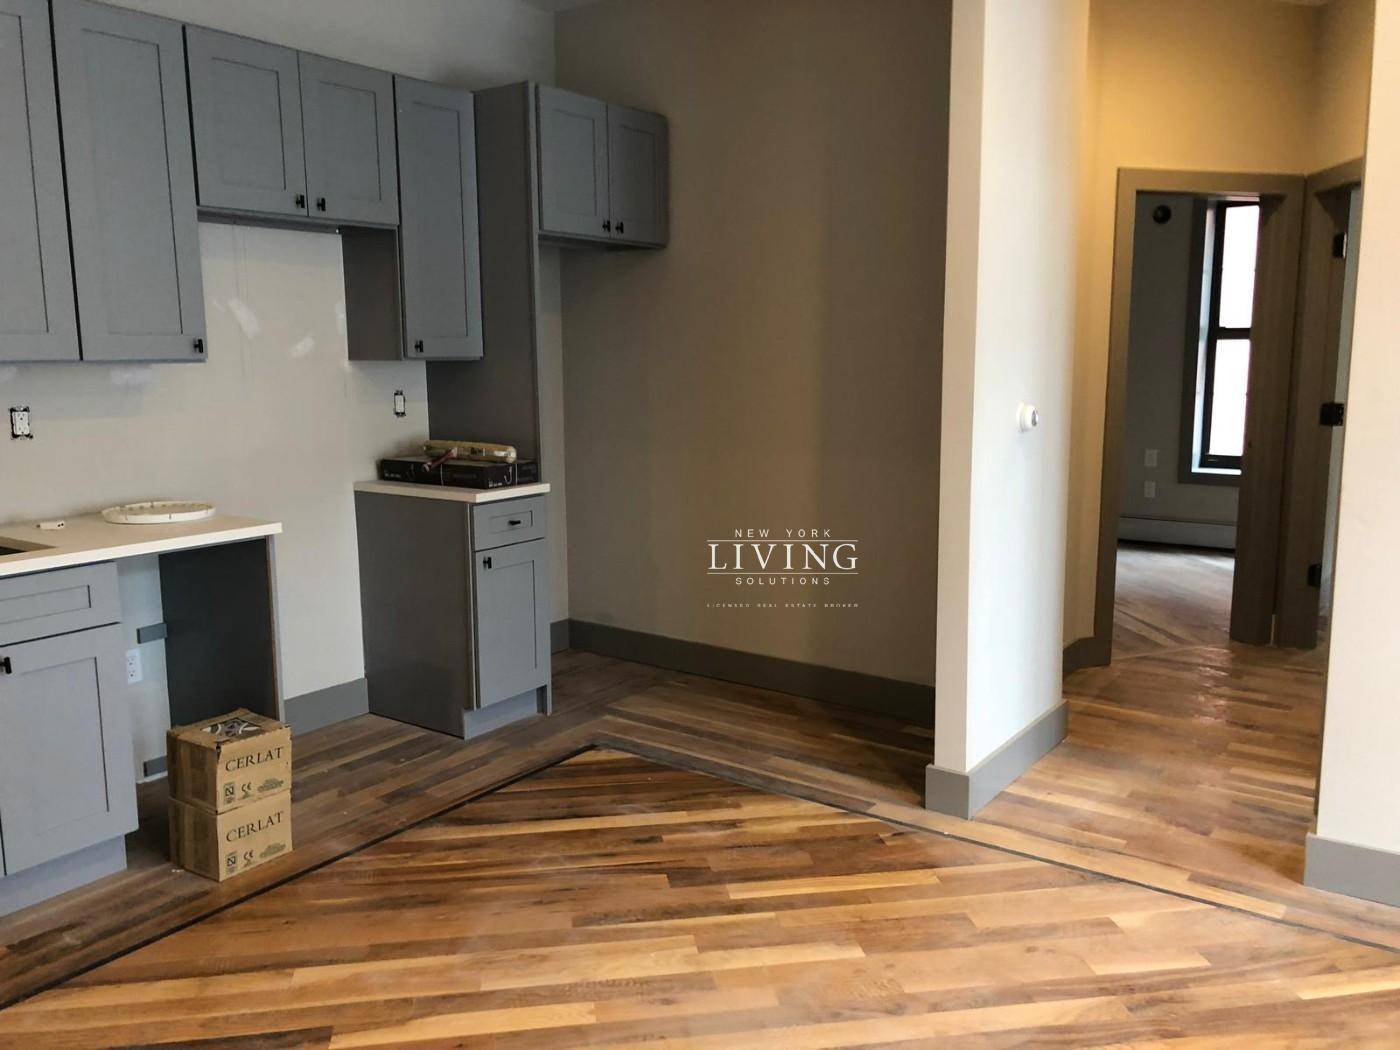 STUNNING AND PRISTINE NEW UNIT 1ST FLOOR BEAUTIFUL 3BD 1BA NEWLY RENOVATED HARDWOOD FLOOR MODERN TILE STYLE BATHROOM HIGH CEILING STAINLESS STEEL APPLIANCE EIK NO FEECONVENIENTLY NEXT TO ALLPUBLIC TRANSPORTATION ...